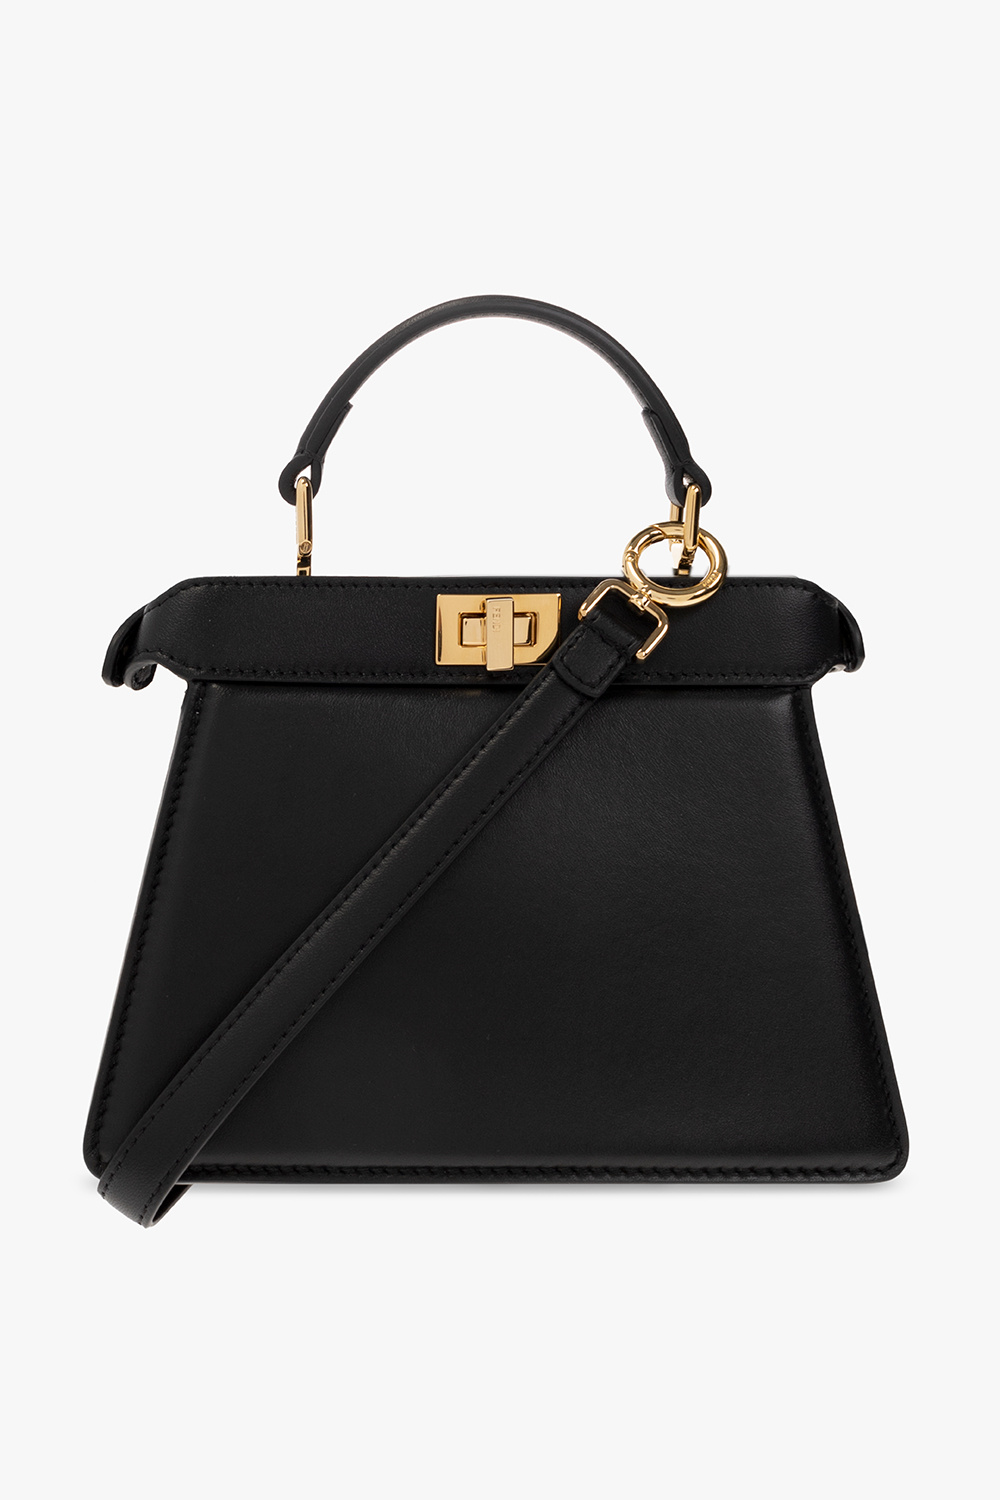 Fendi 'By The Way' back in black leather with fur Bag Bug. Street